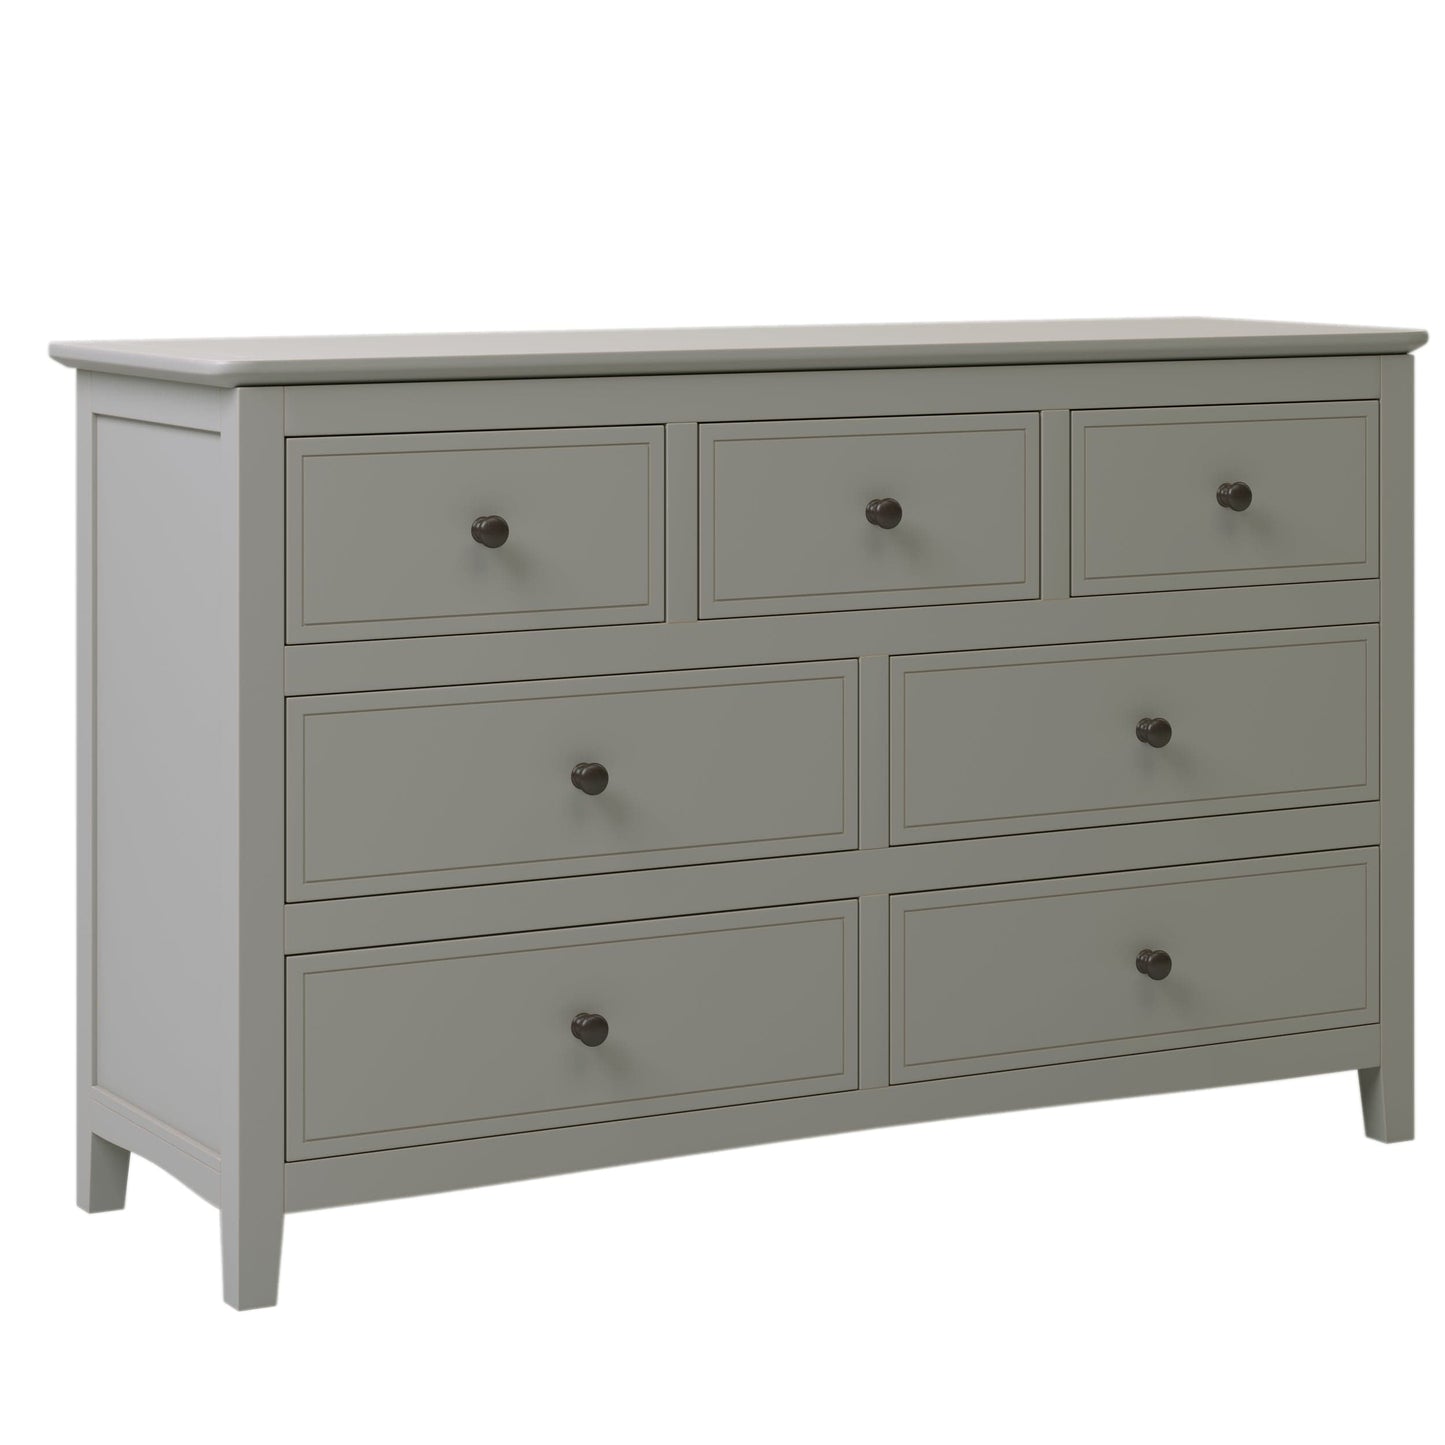 7 Drawers Solid Wood Dresser,Gray